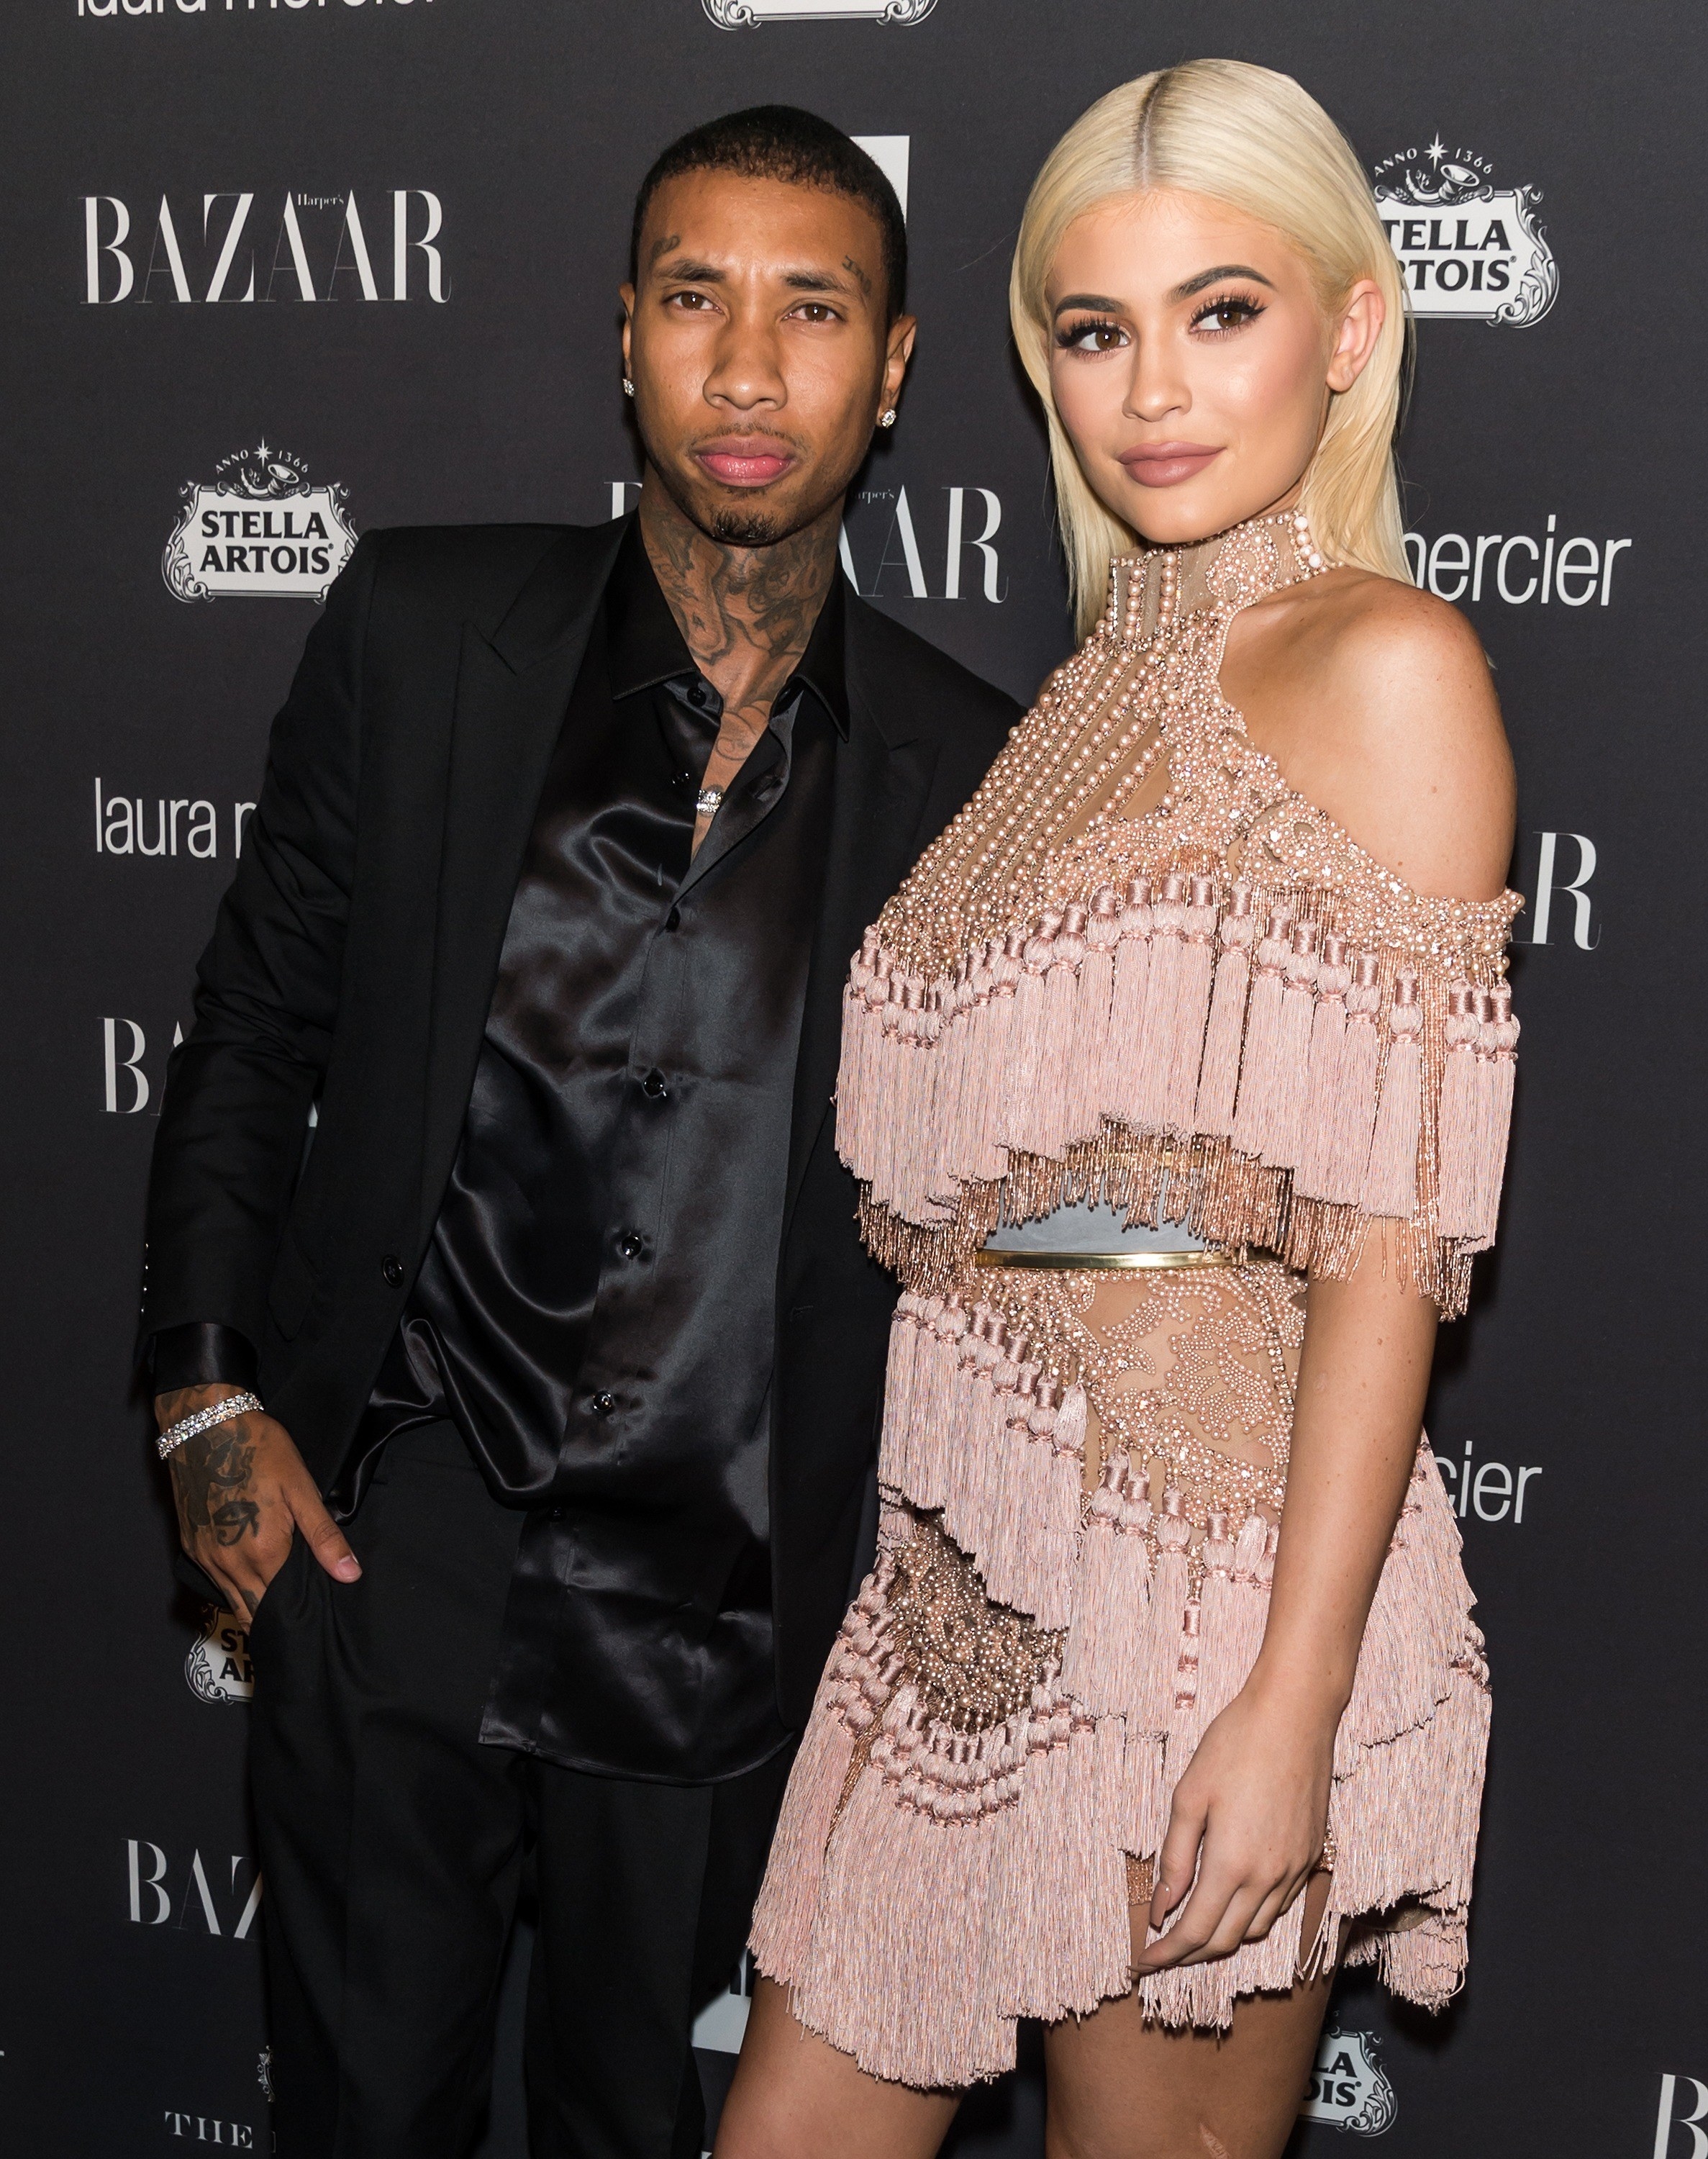 Tyga and Kylie at a red carpet event